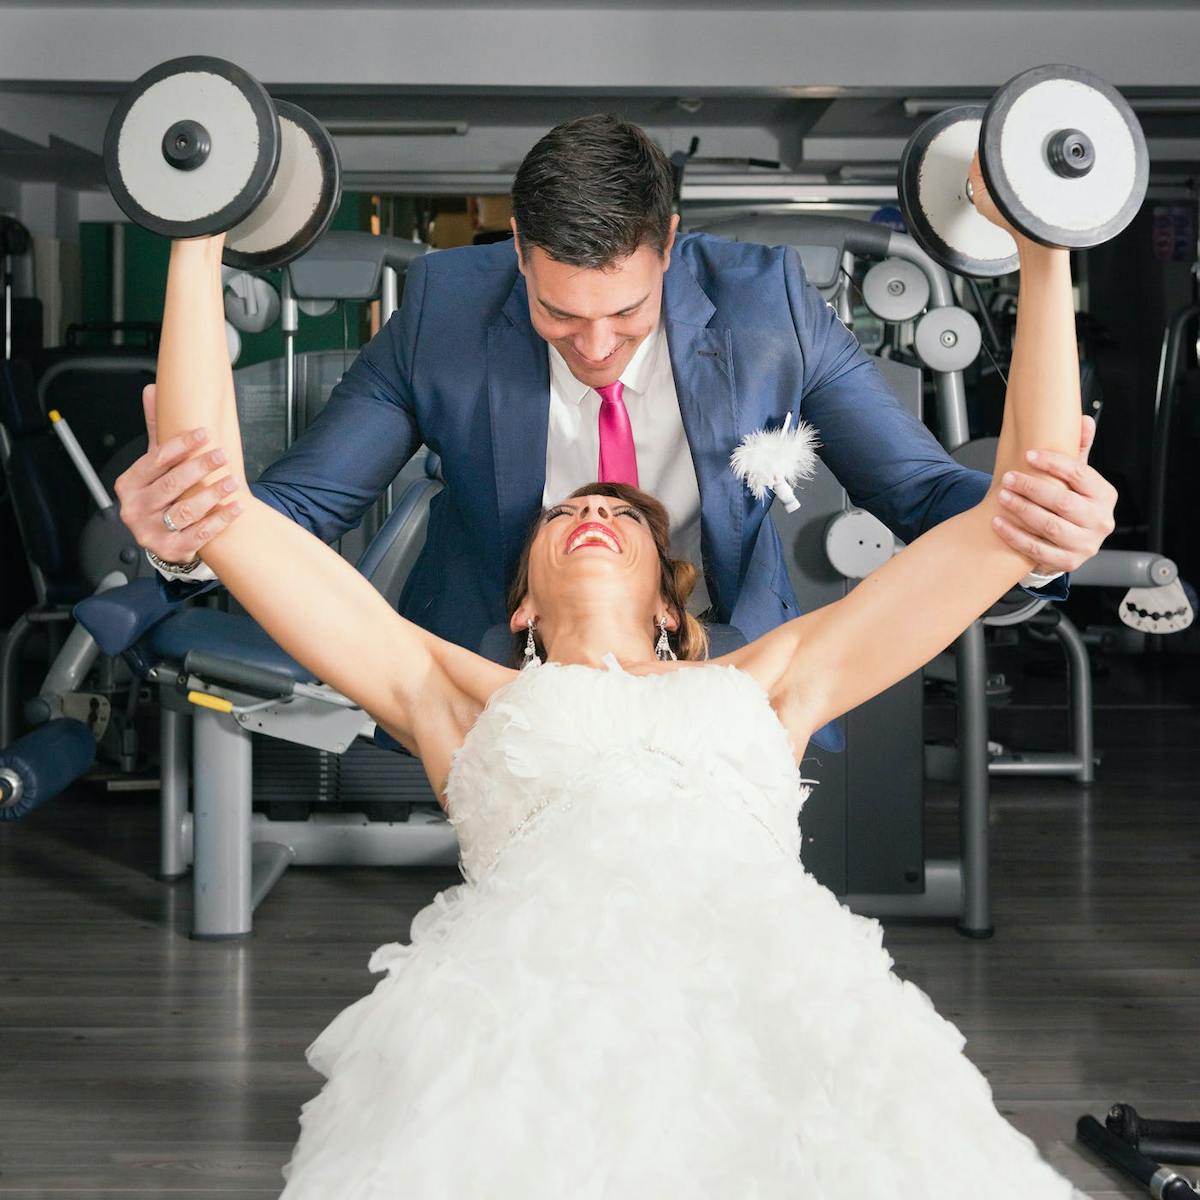 wedding diet and fitness tips